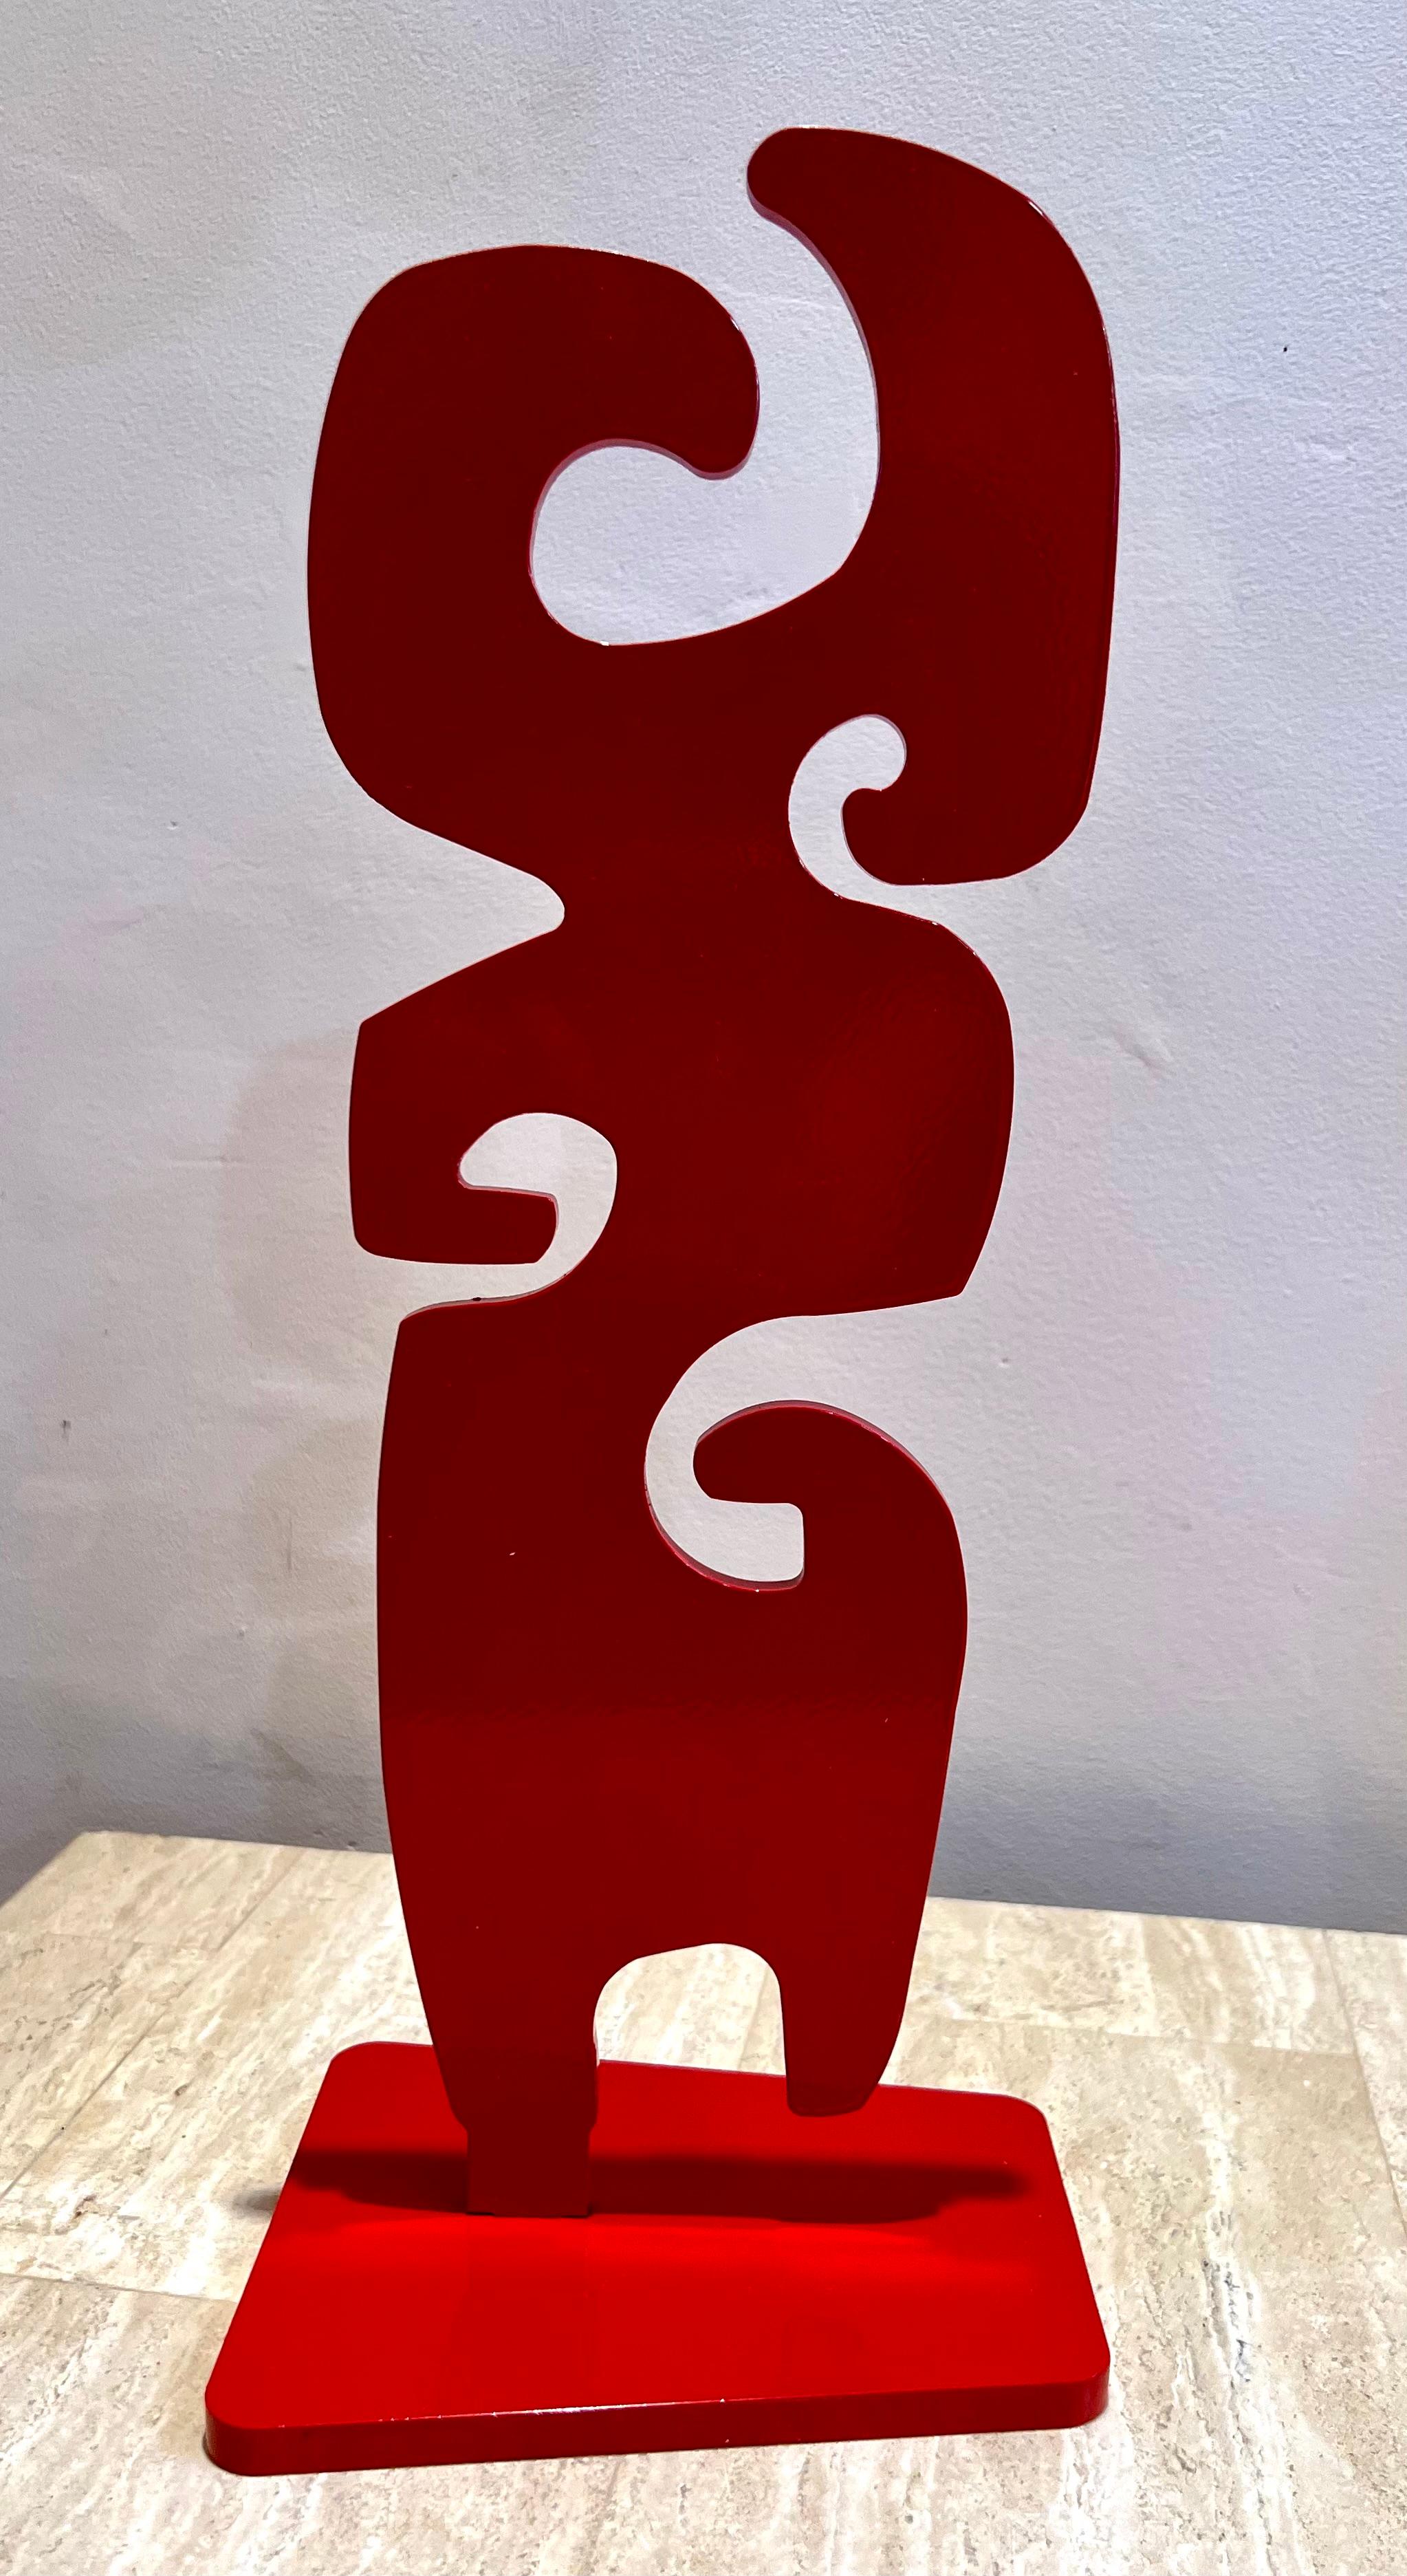 Grandmother, by Melanie Yazzie, sculpture, edition, aluminum, red, abstract 

limited edition of 40. Available in red or silver. Inquire with the gallery for additional color options and sizes.

As a printmaker, painter, and sculptor, my work draws